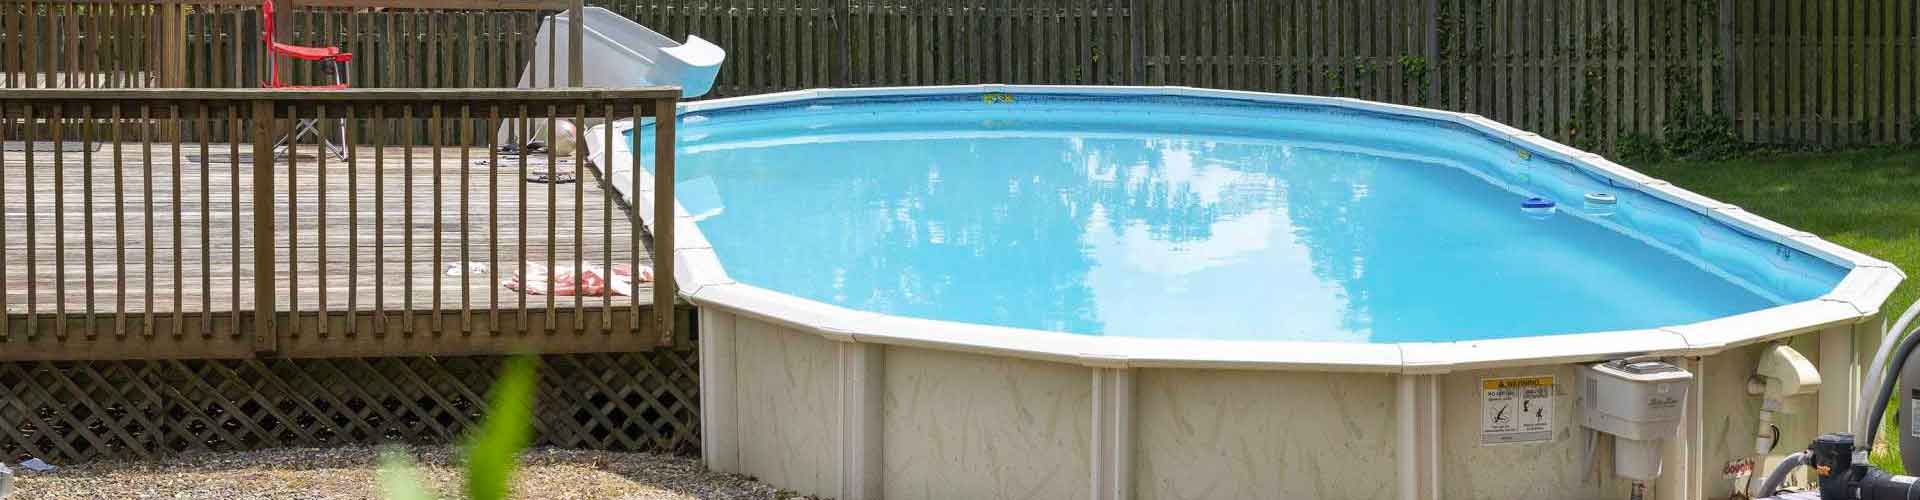 Learn About Pools